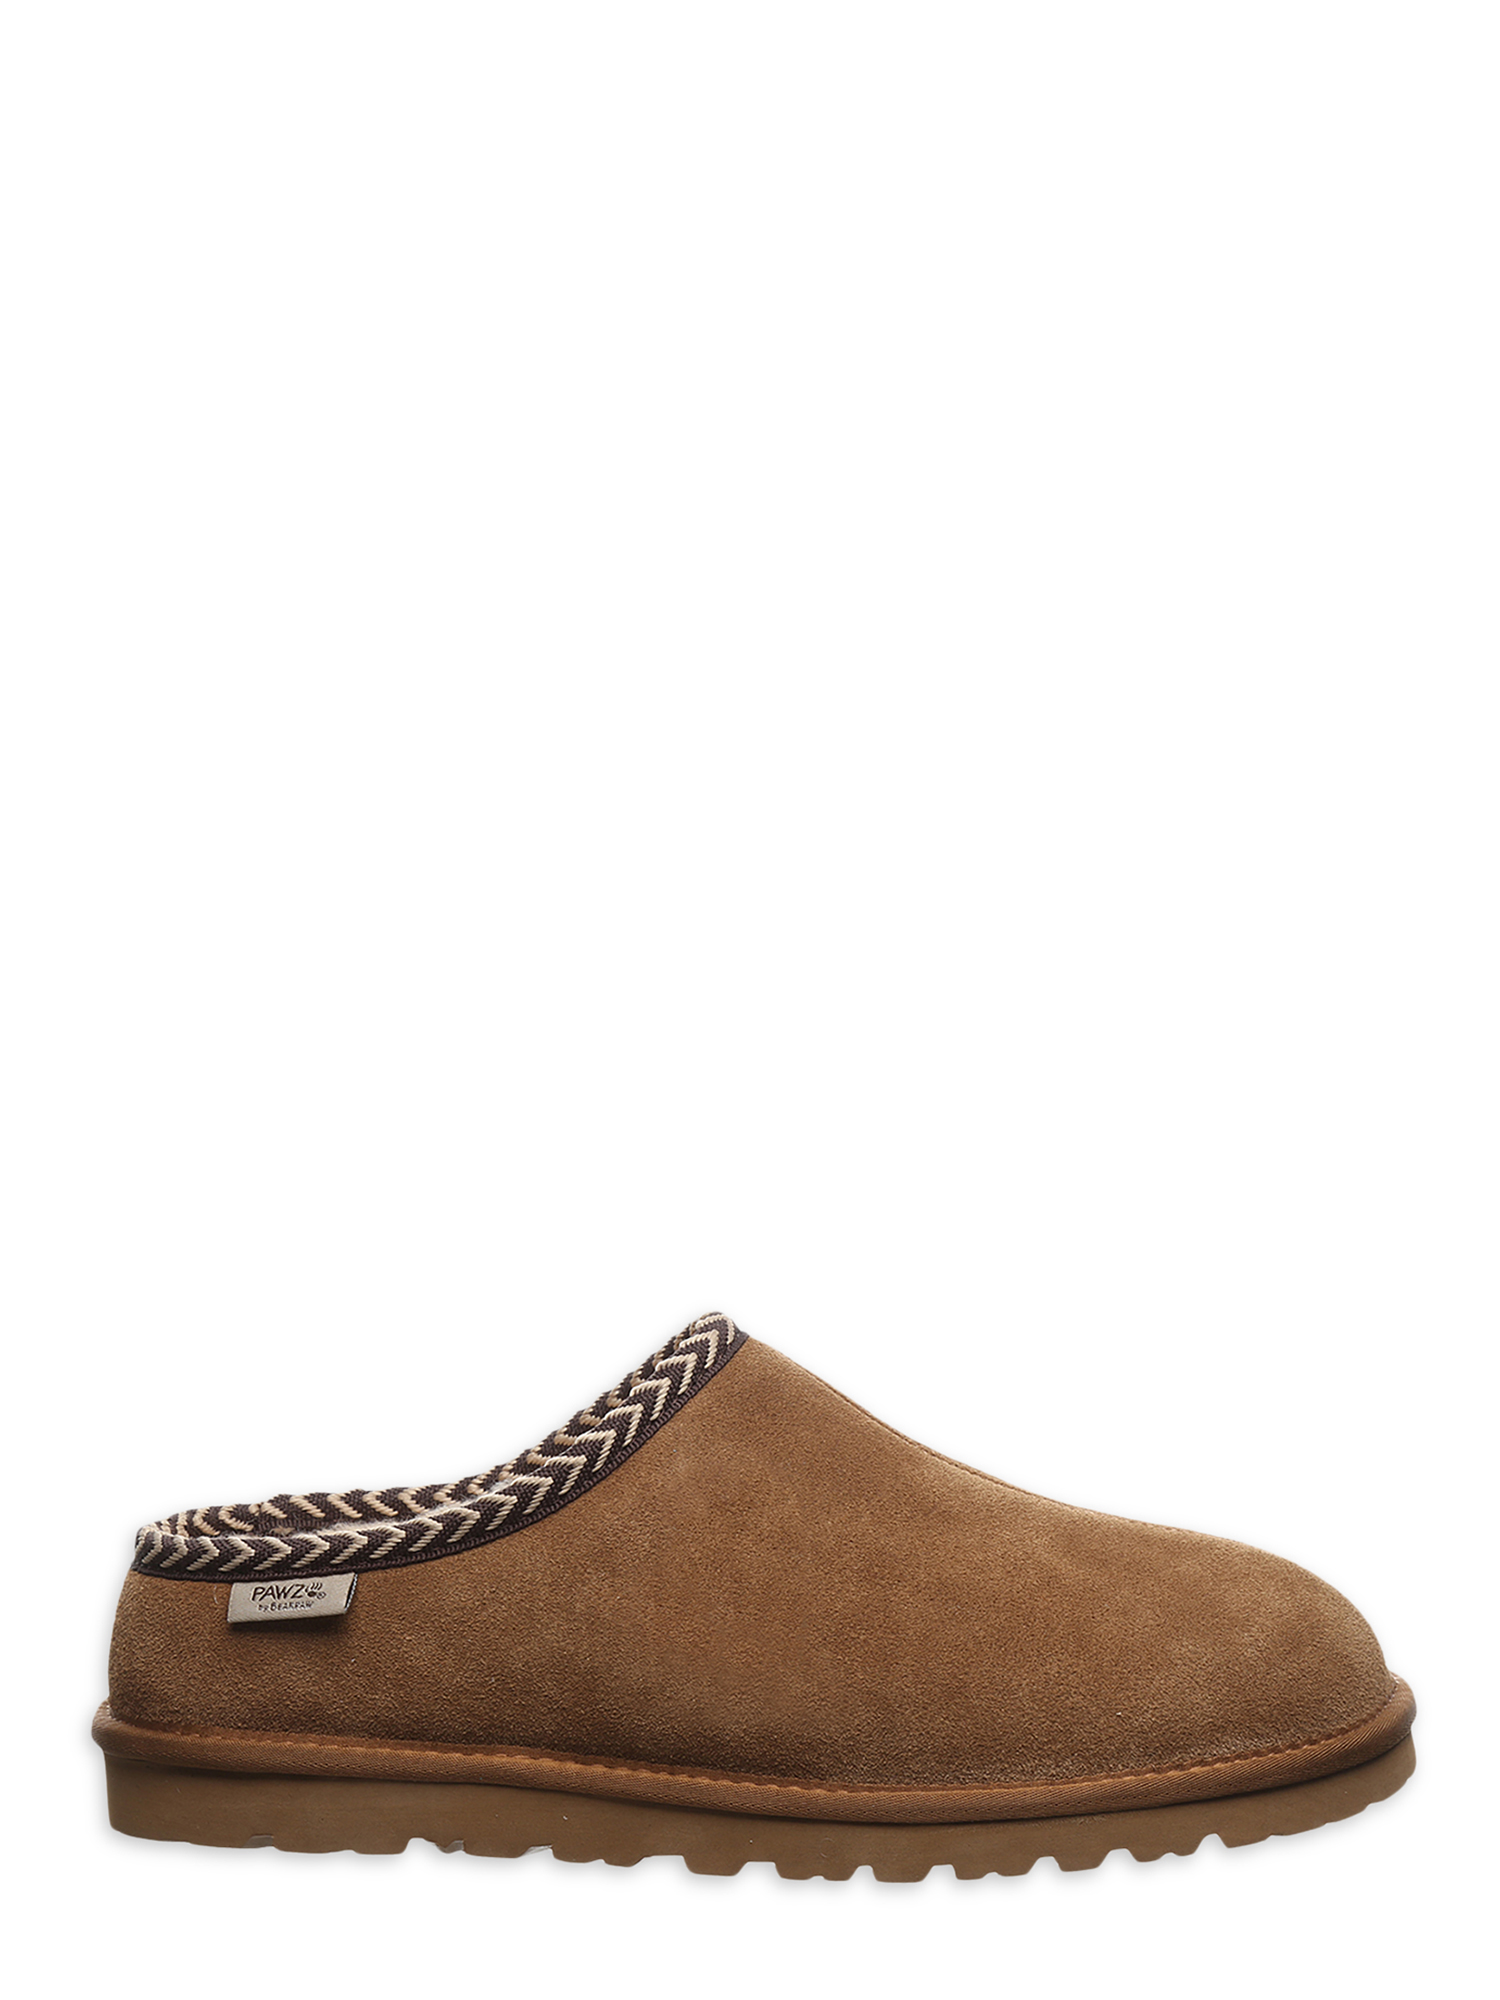 Pawz by Bearpaw Men's Genuine Suede Kevin Slipper Clogs - image 2 of 5